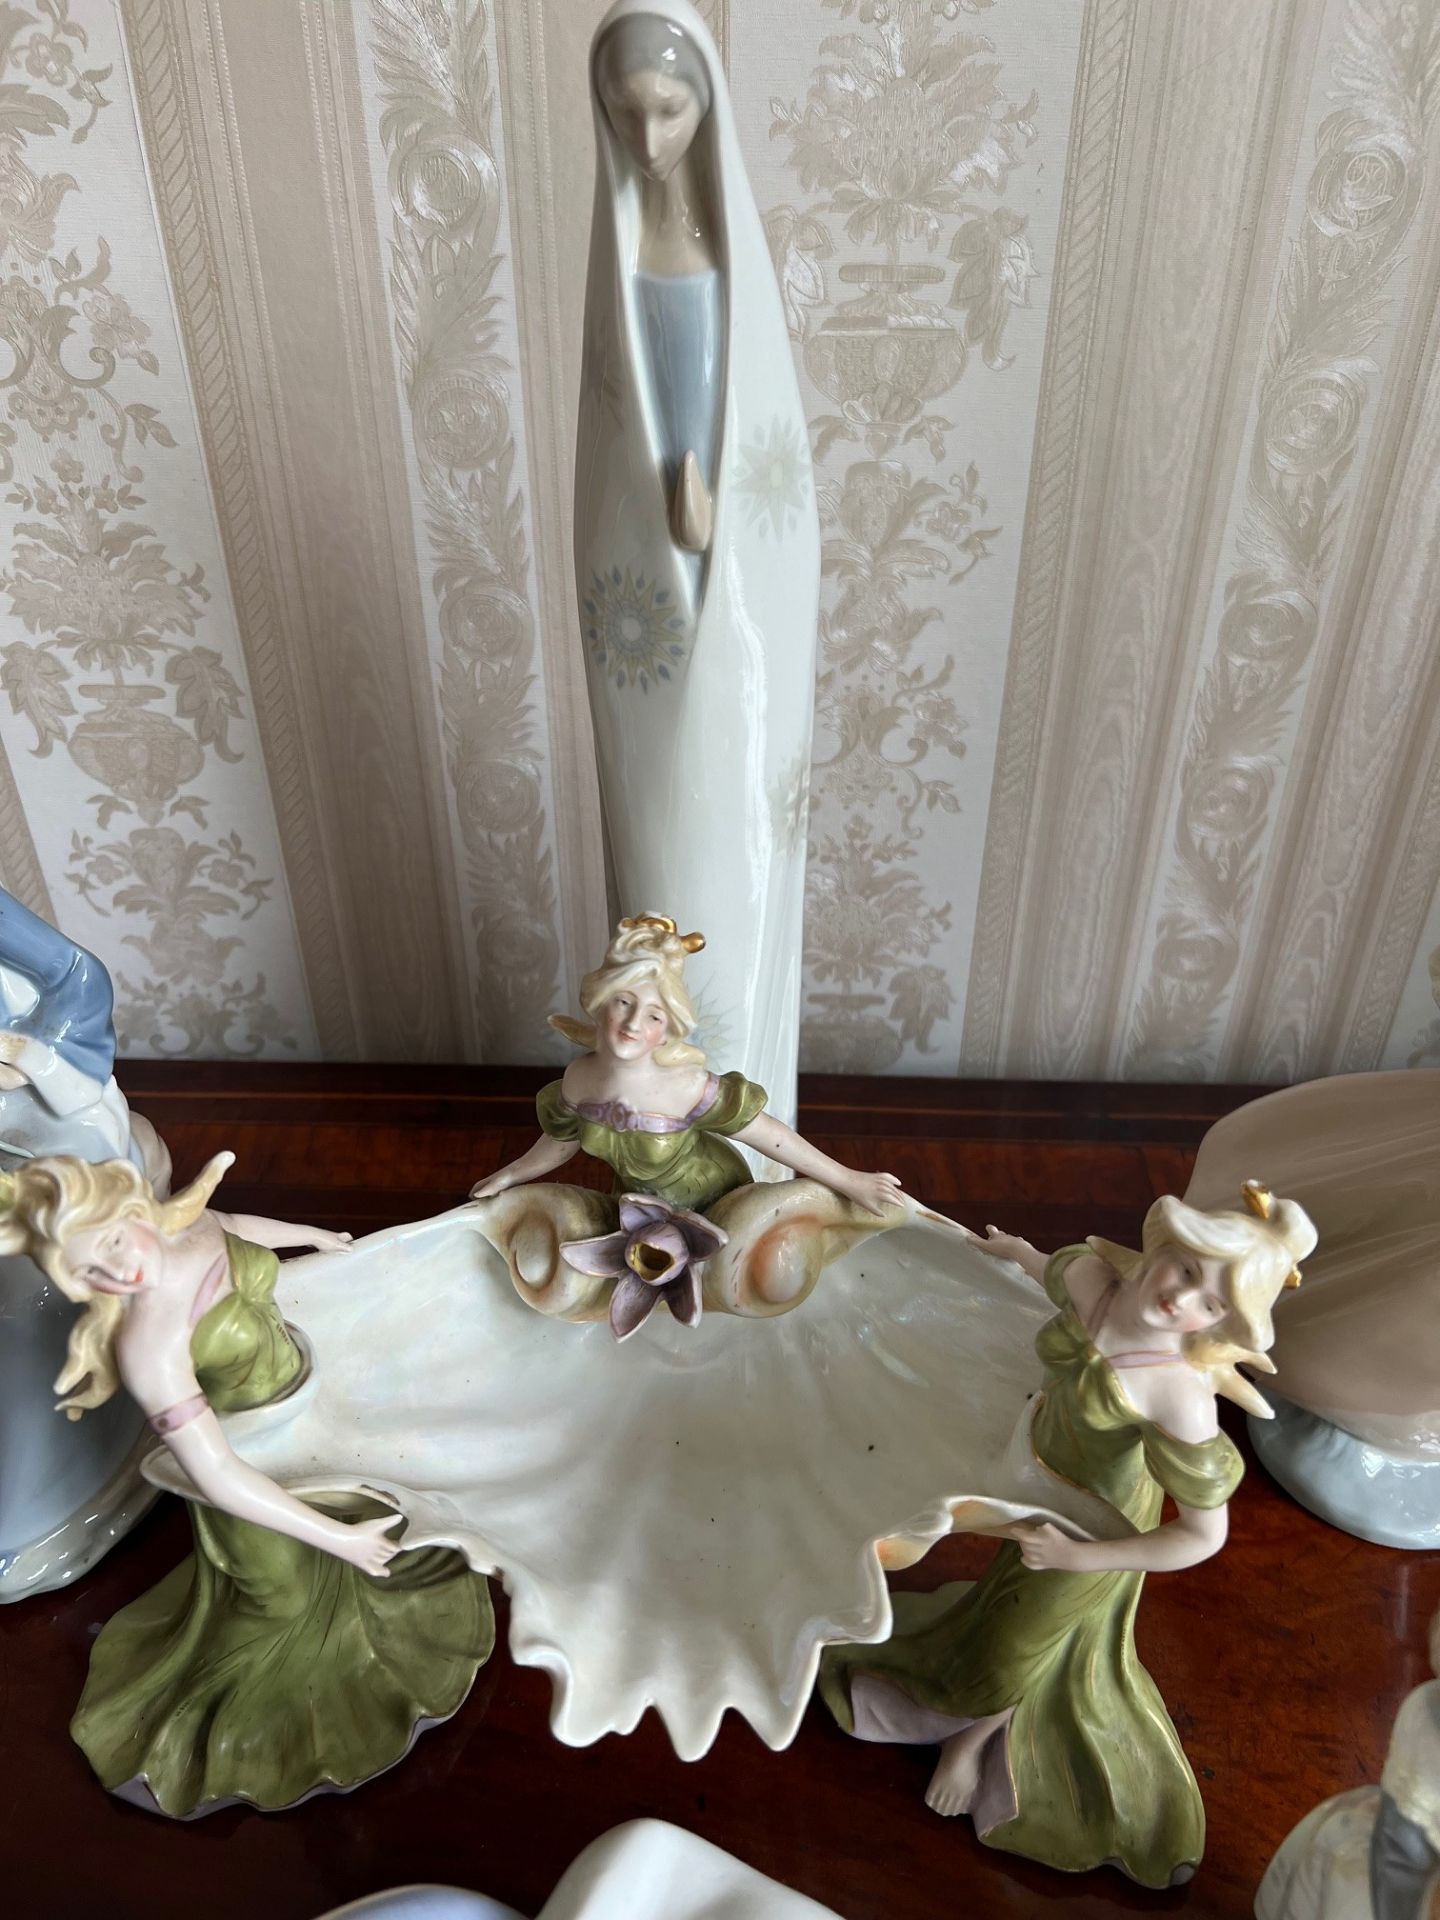 SIX LLADRO FIGURES AND ROYAL DUX STYLE POSY BOWL - Image 3 of 3